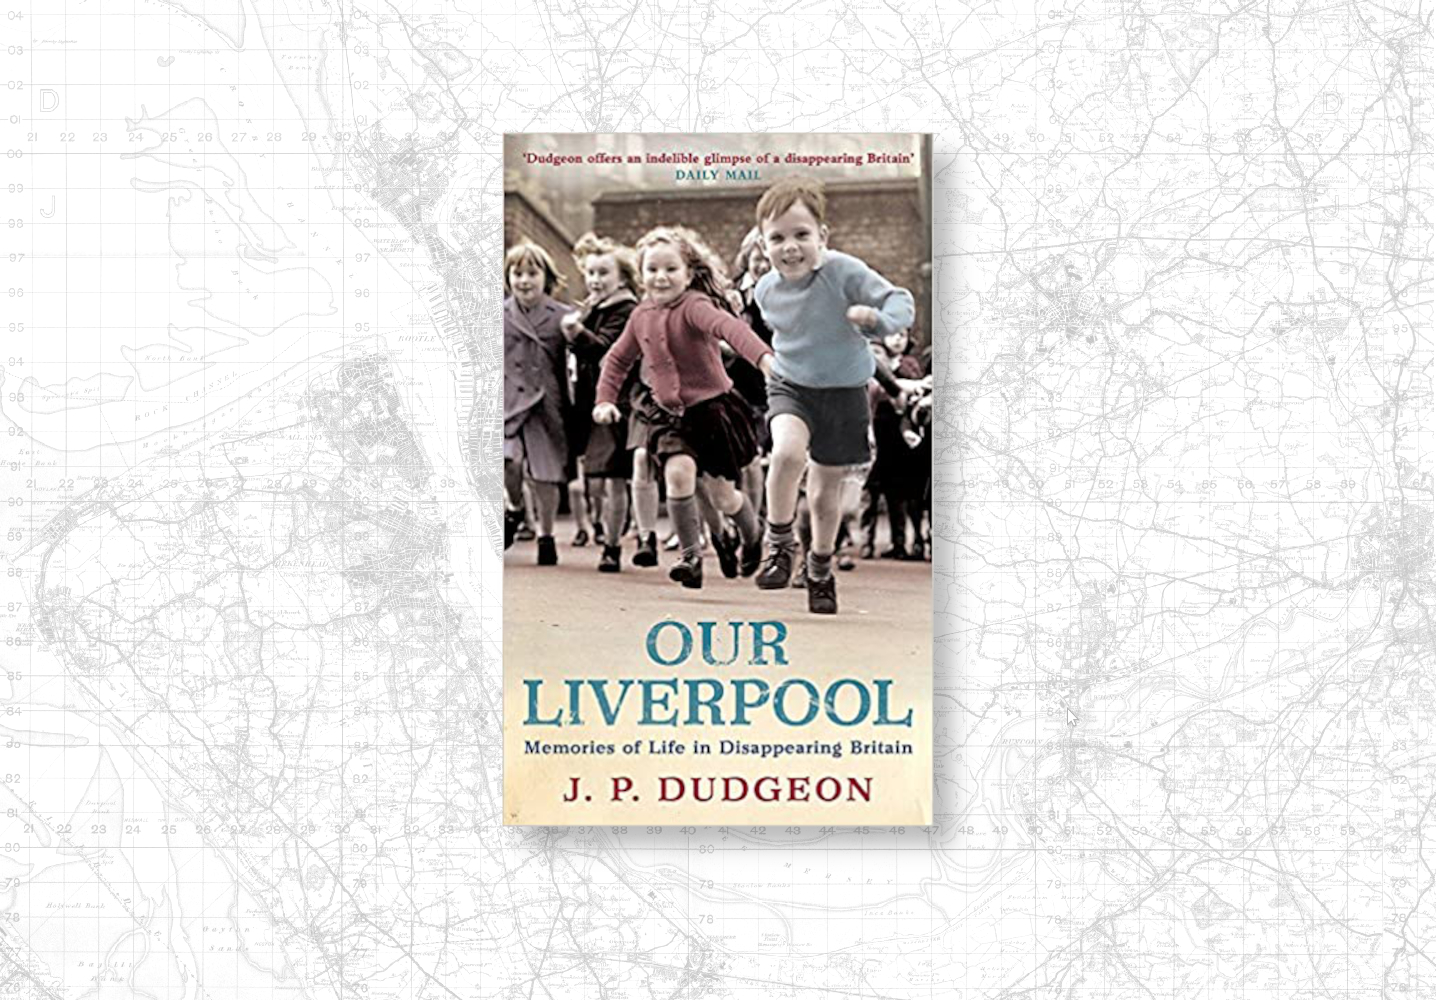 Cover image from the book Our Liverpool, by J. P. Dudgeon